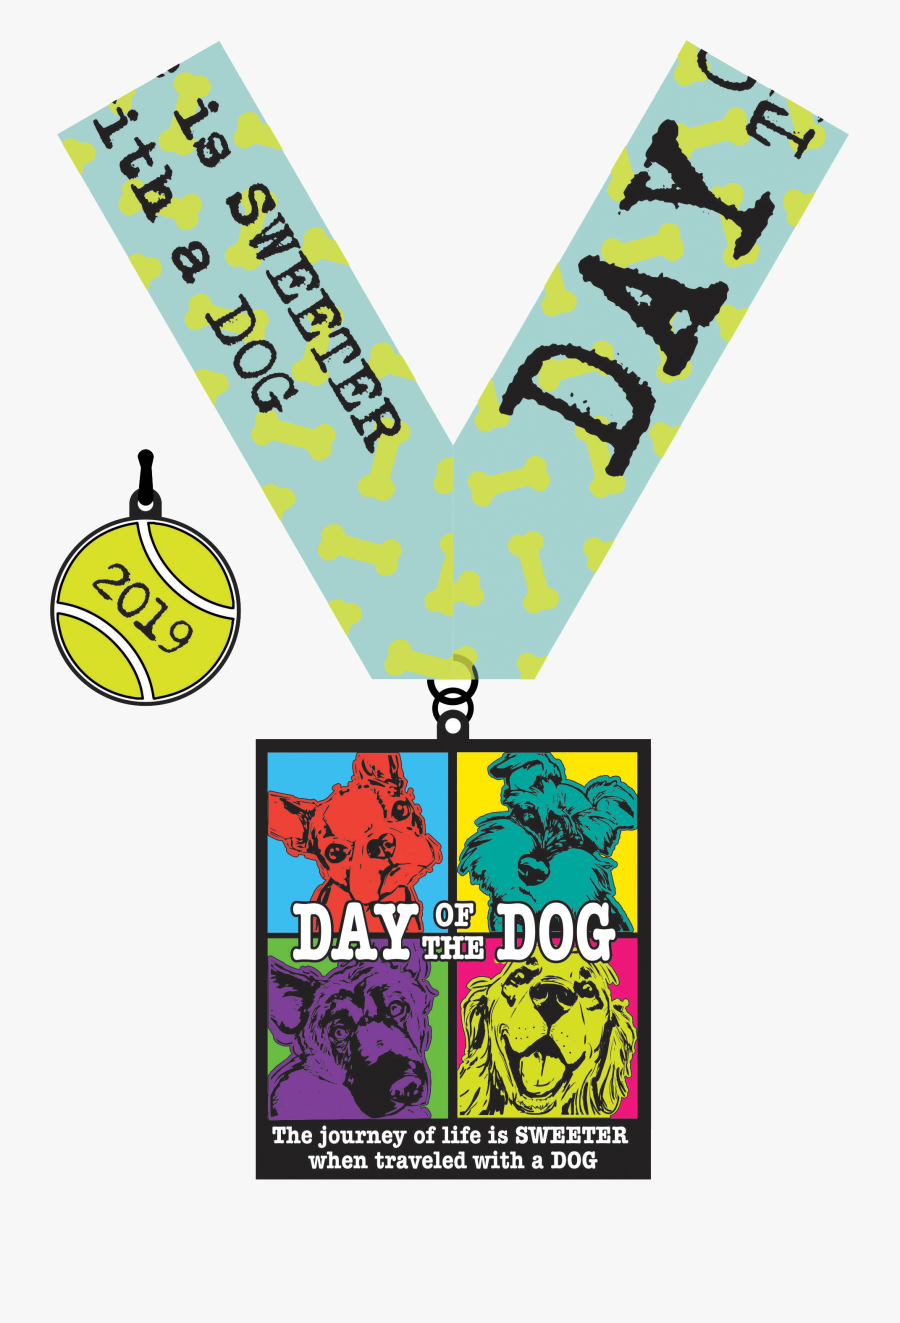 Monday, August 26th, 2019 Is National Dog Day To Help - August 26th National Dog Day 2019, Transparent Clipart